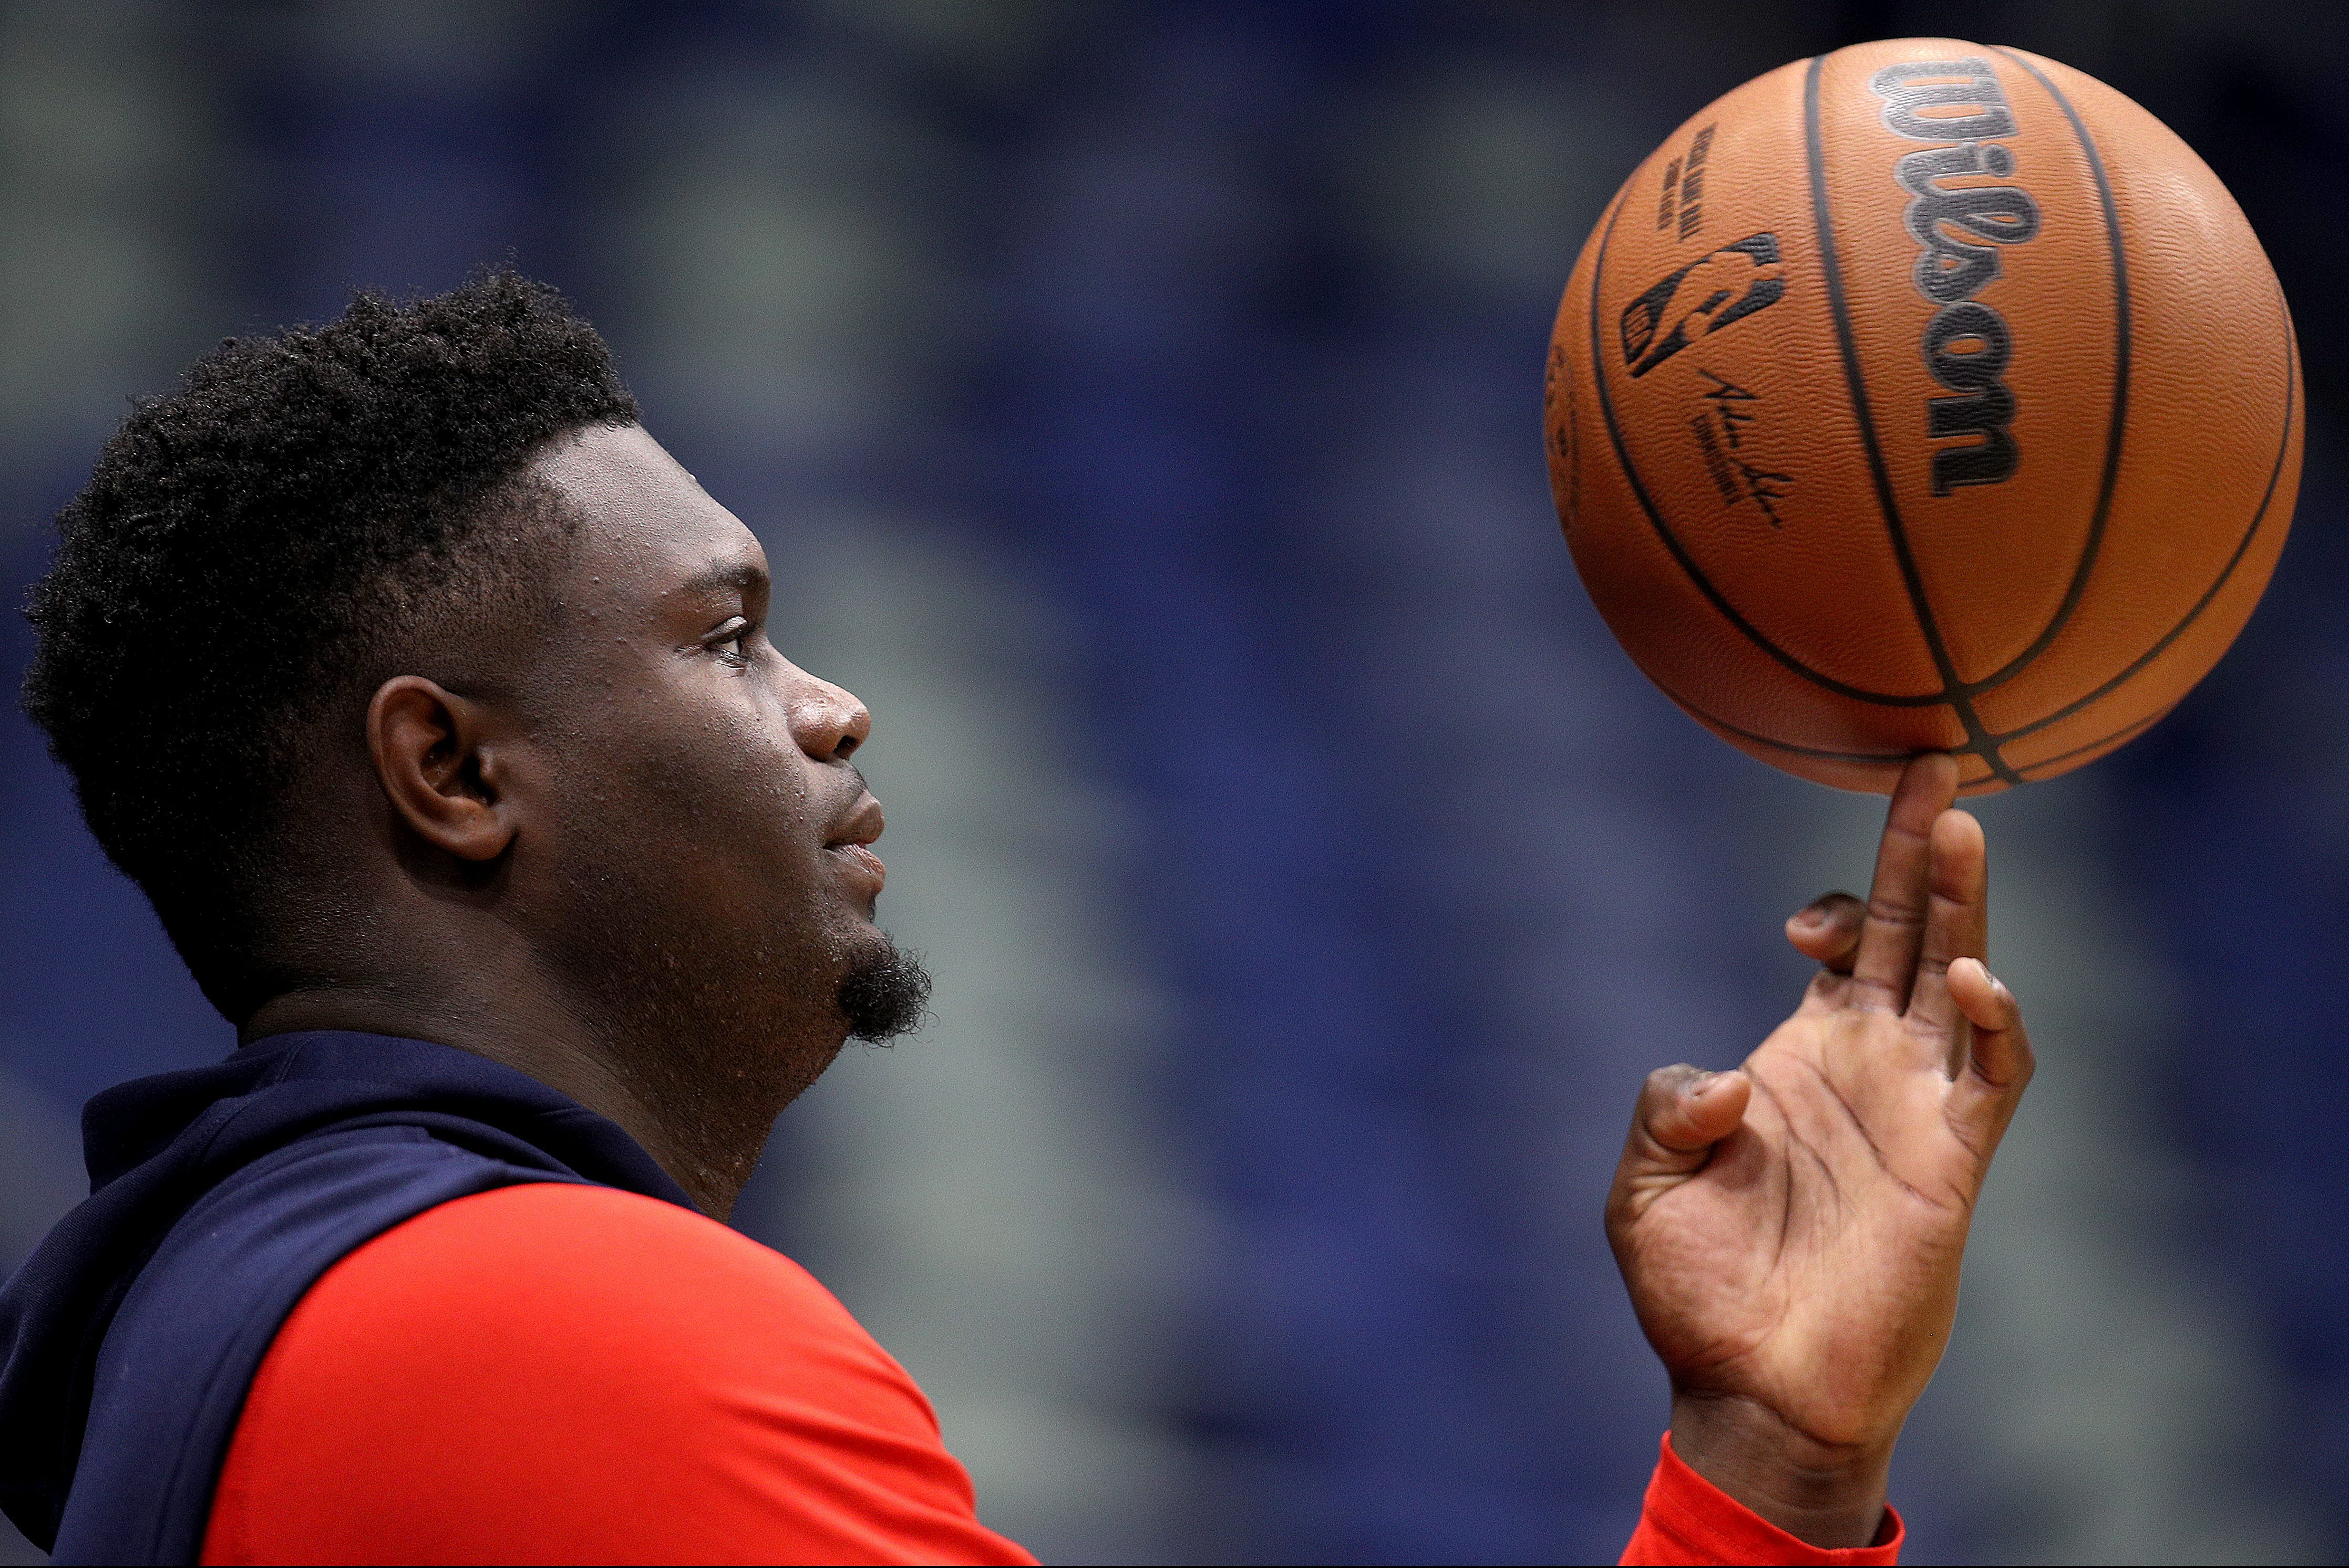 Zion Williamson among four first-timers added to NBA All-Star game